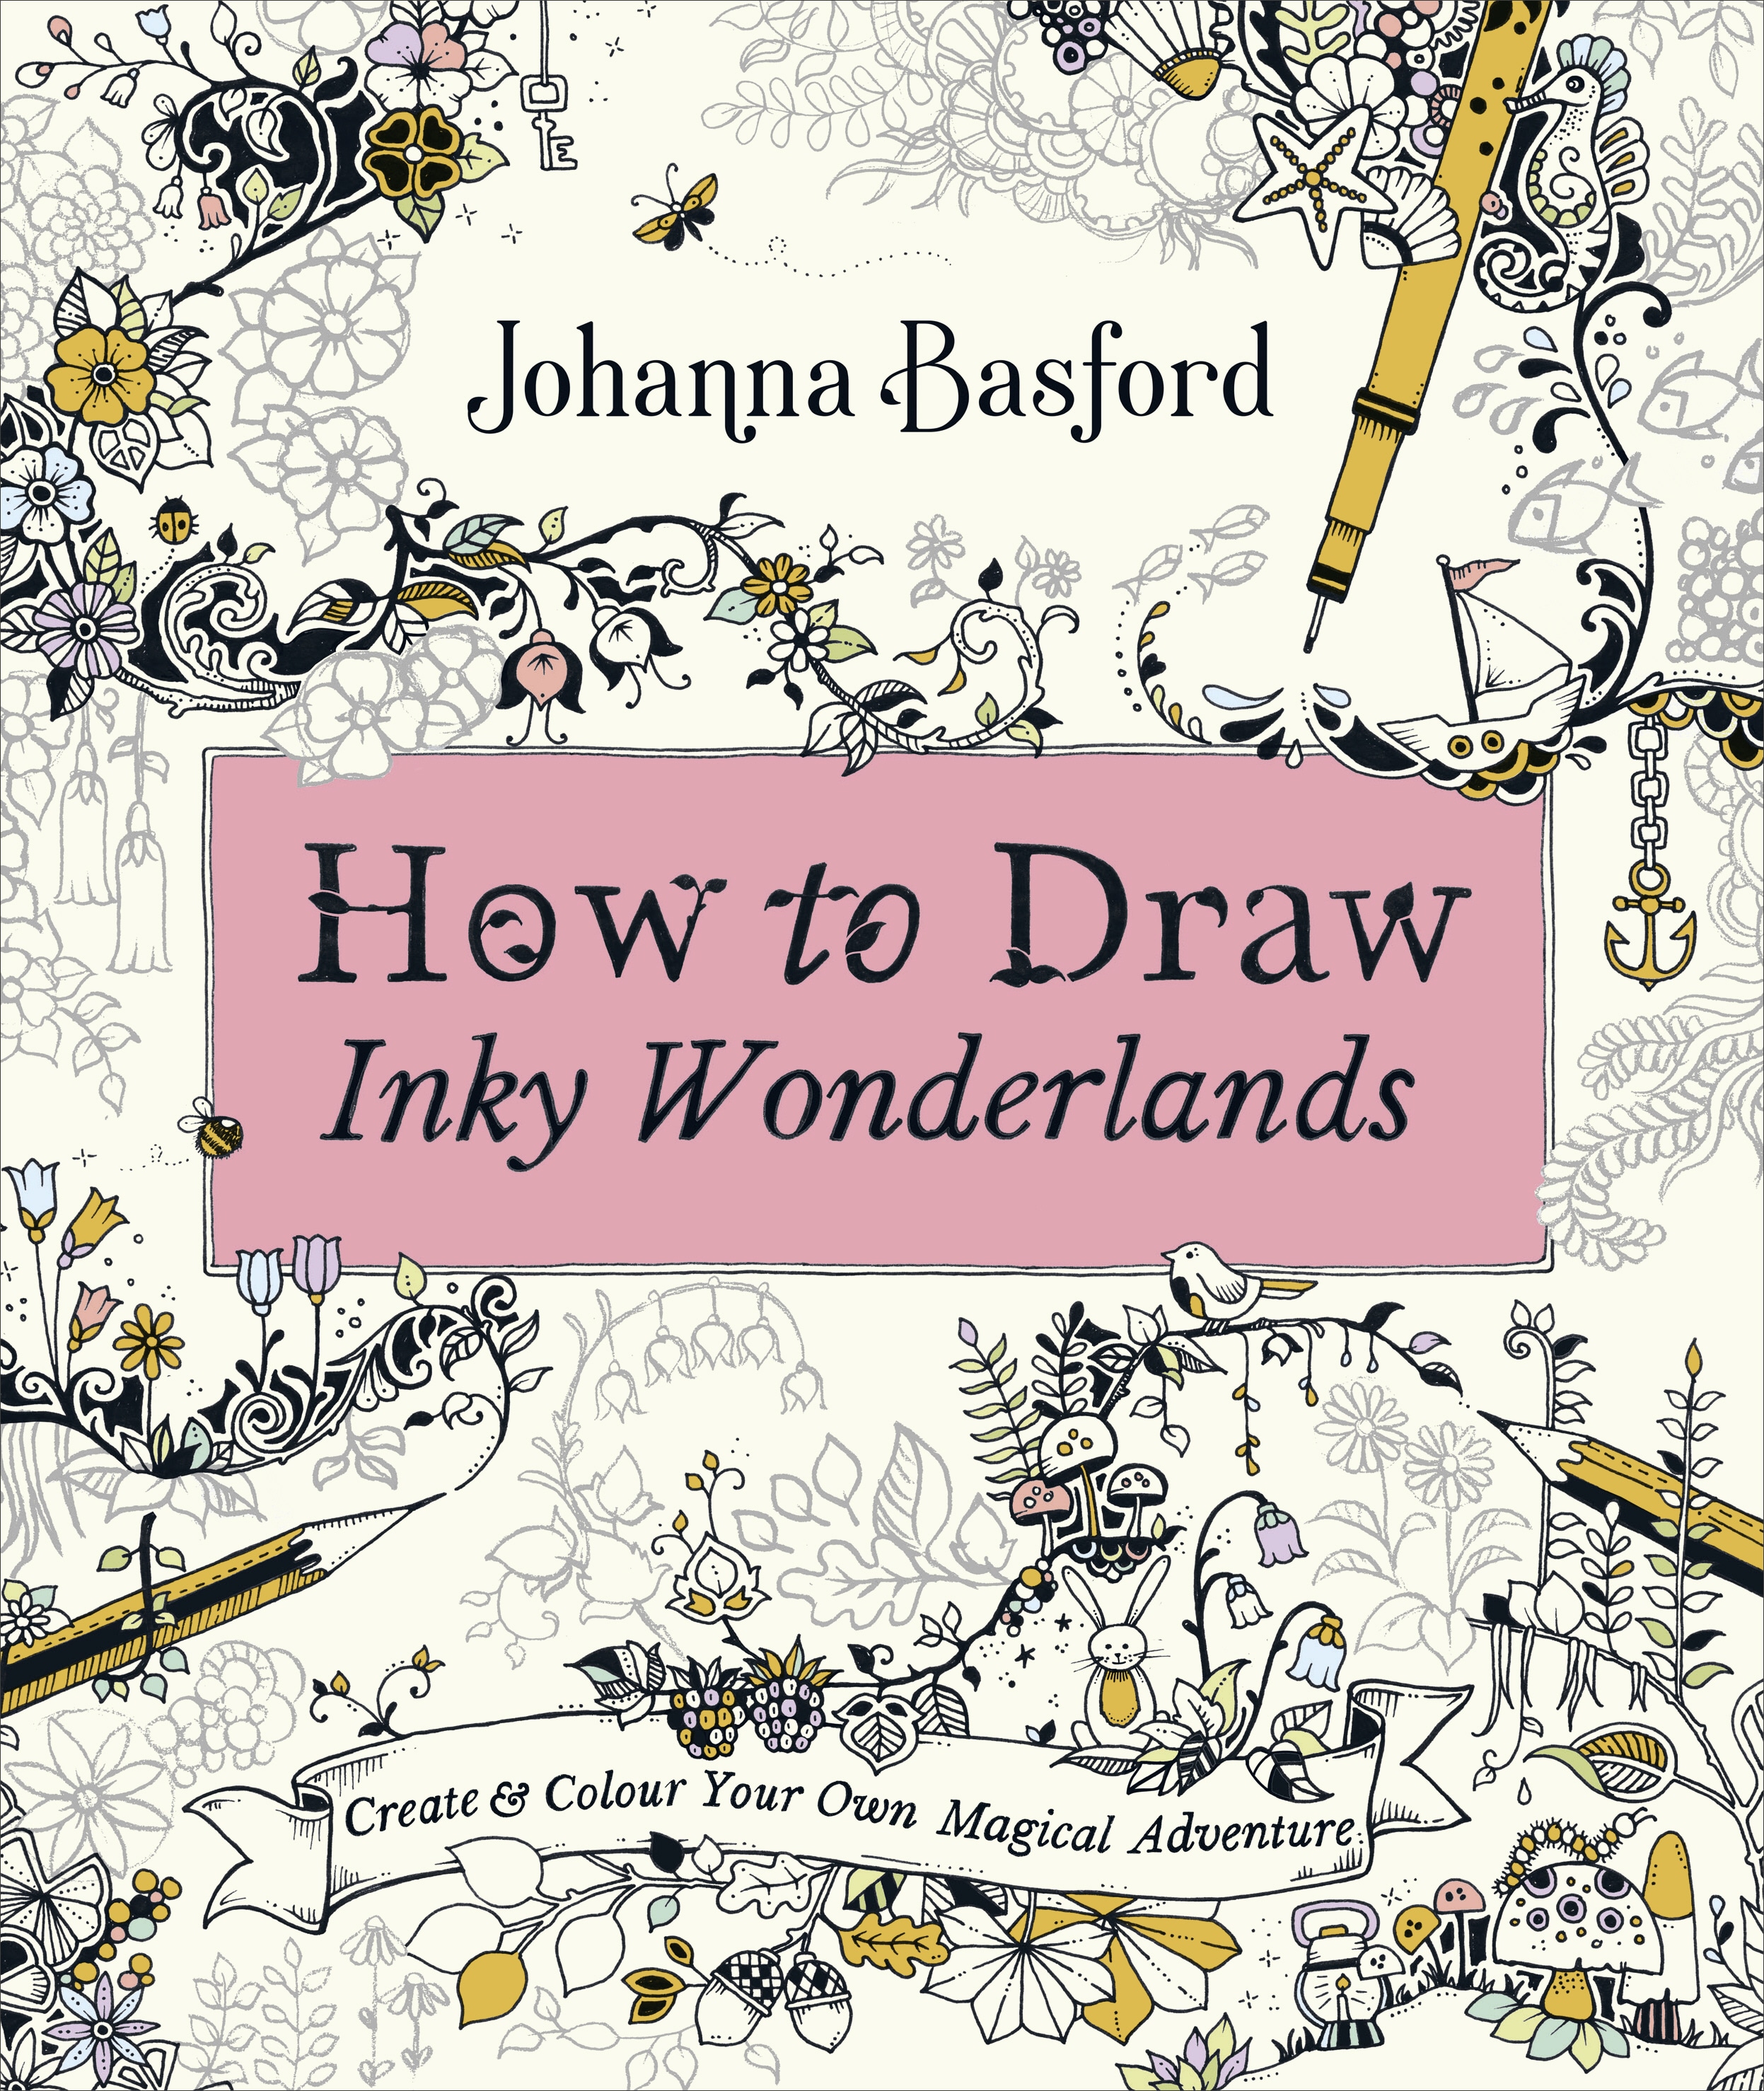 Book “How to Draw Inky Wonderlands” by Johanna Basford — October 17, 2019